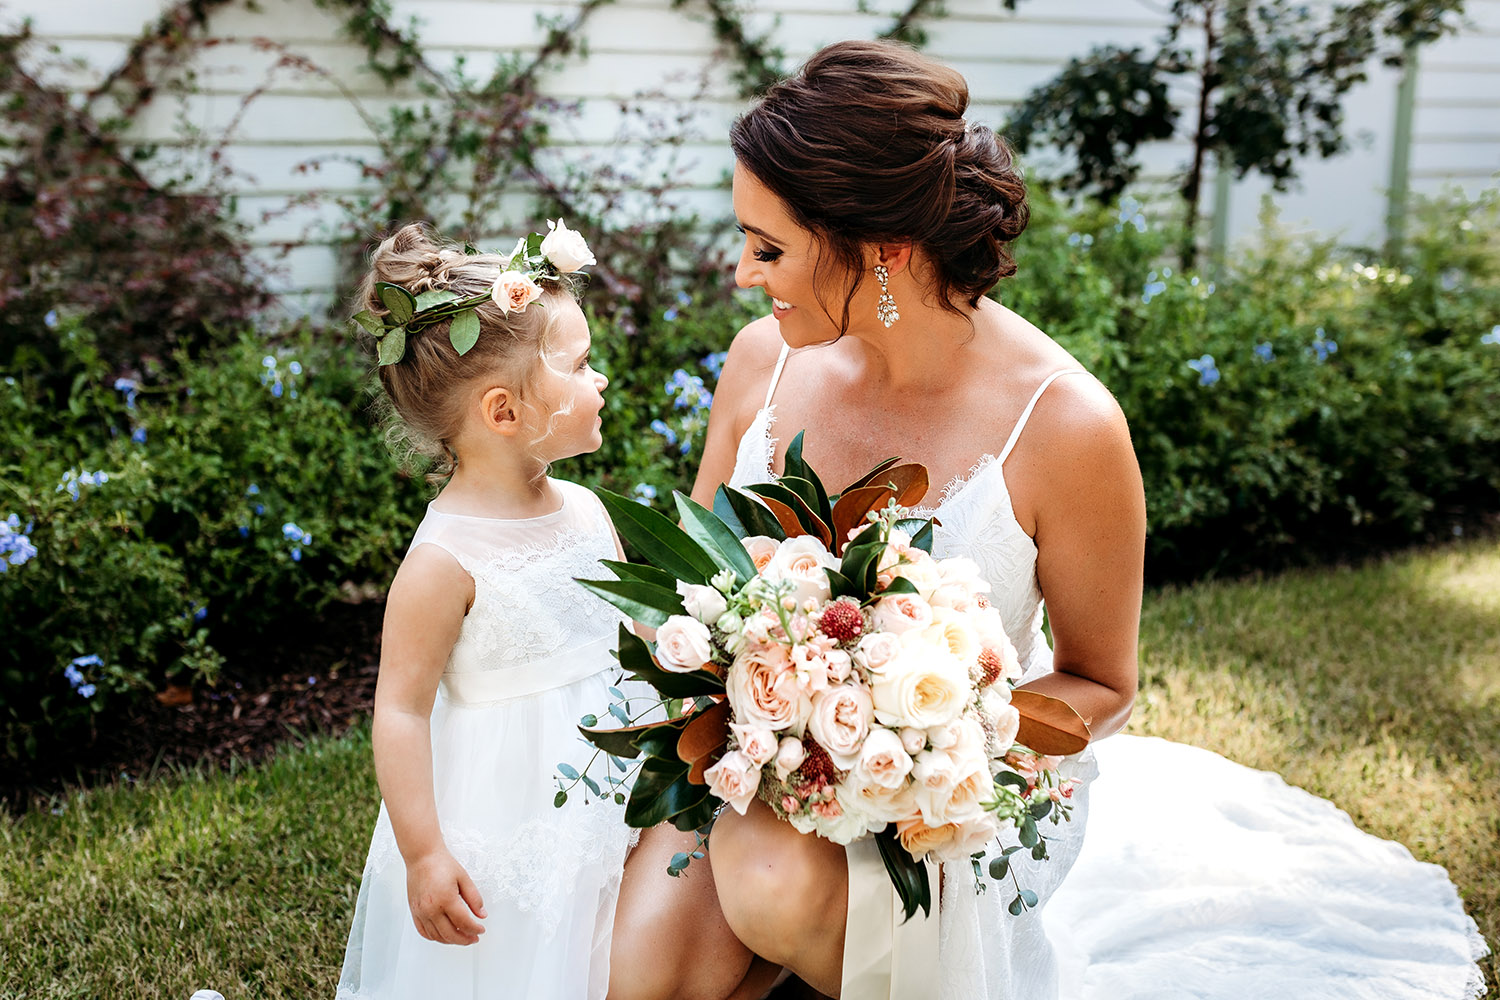 Flower girl and the bride holding a bouquet with magnolia leaves and roses